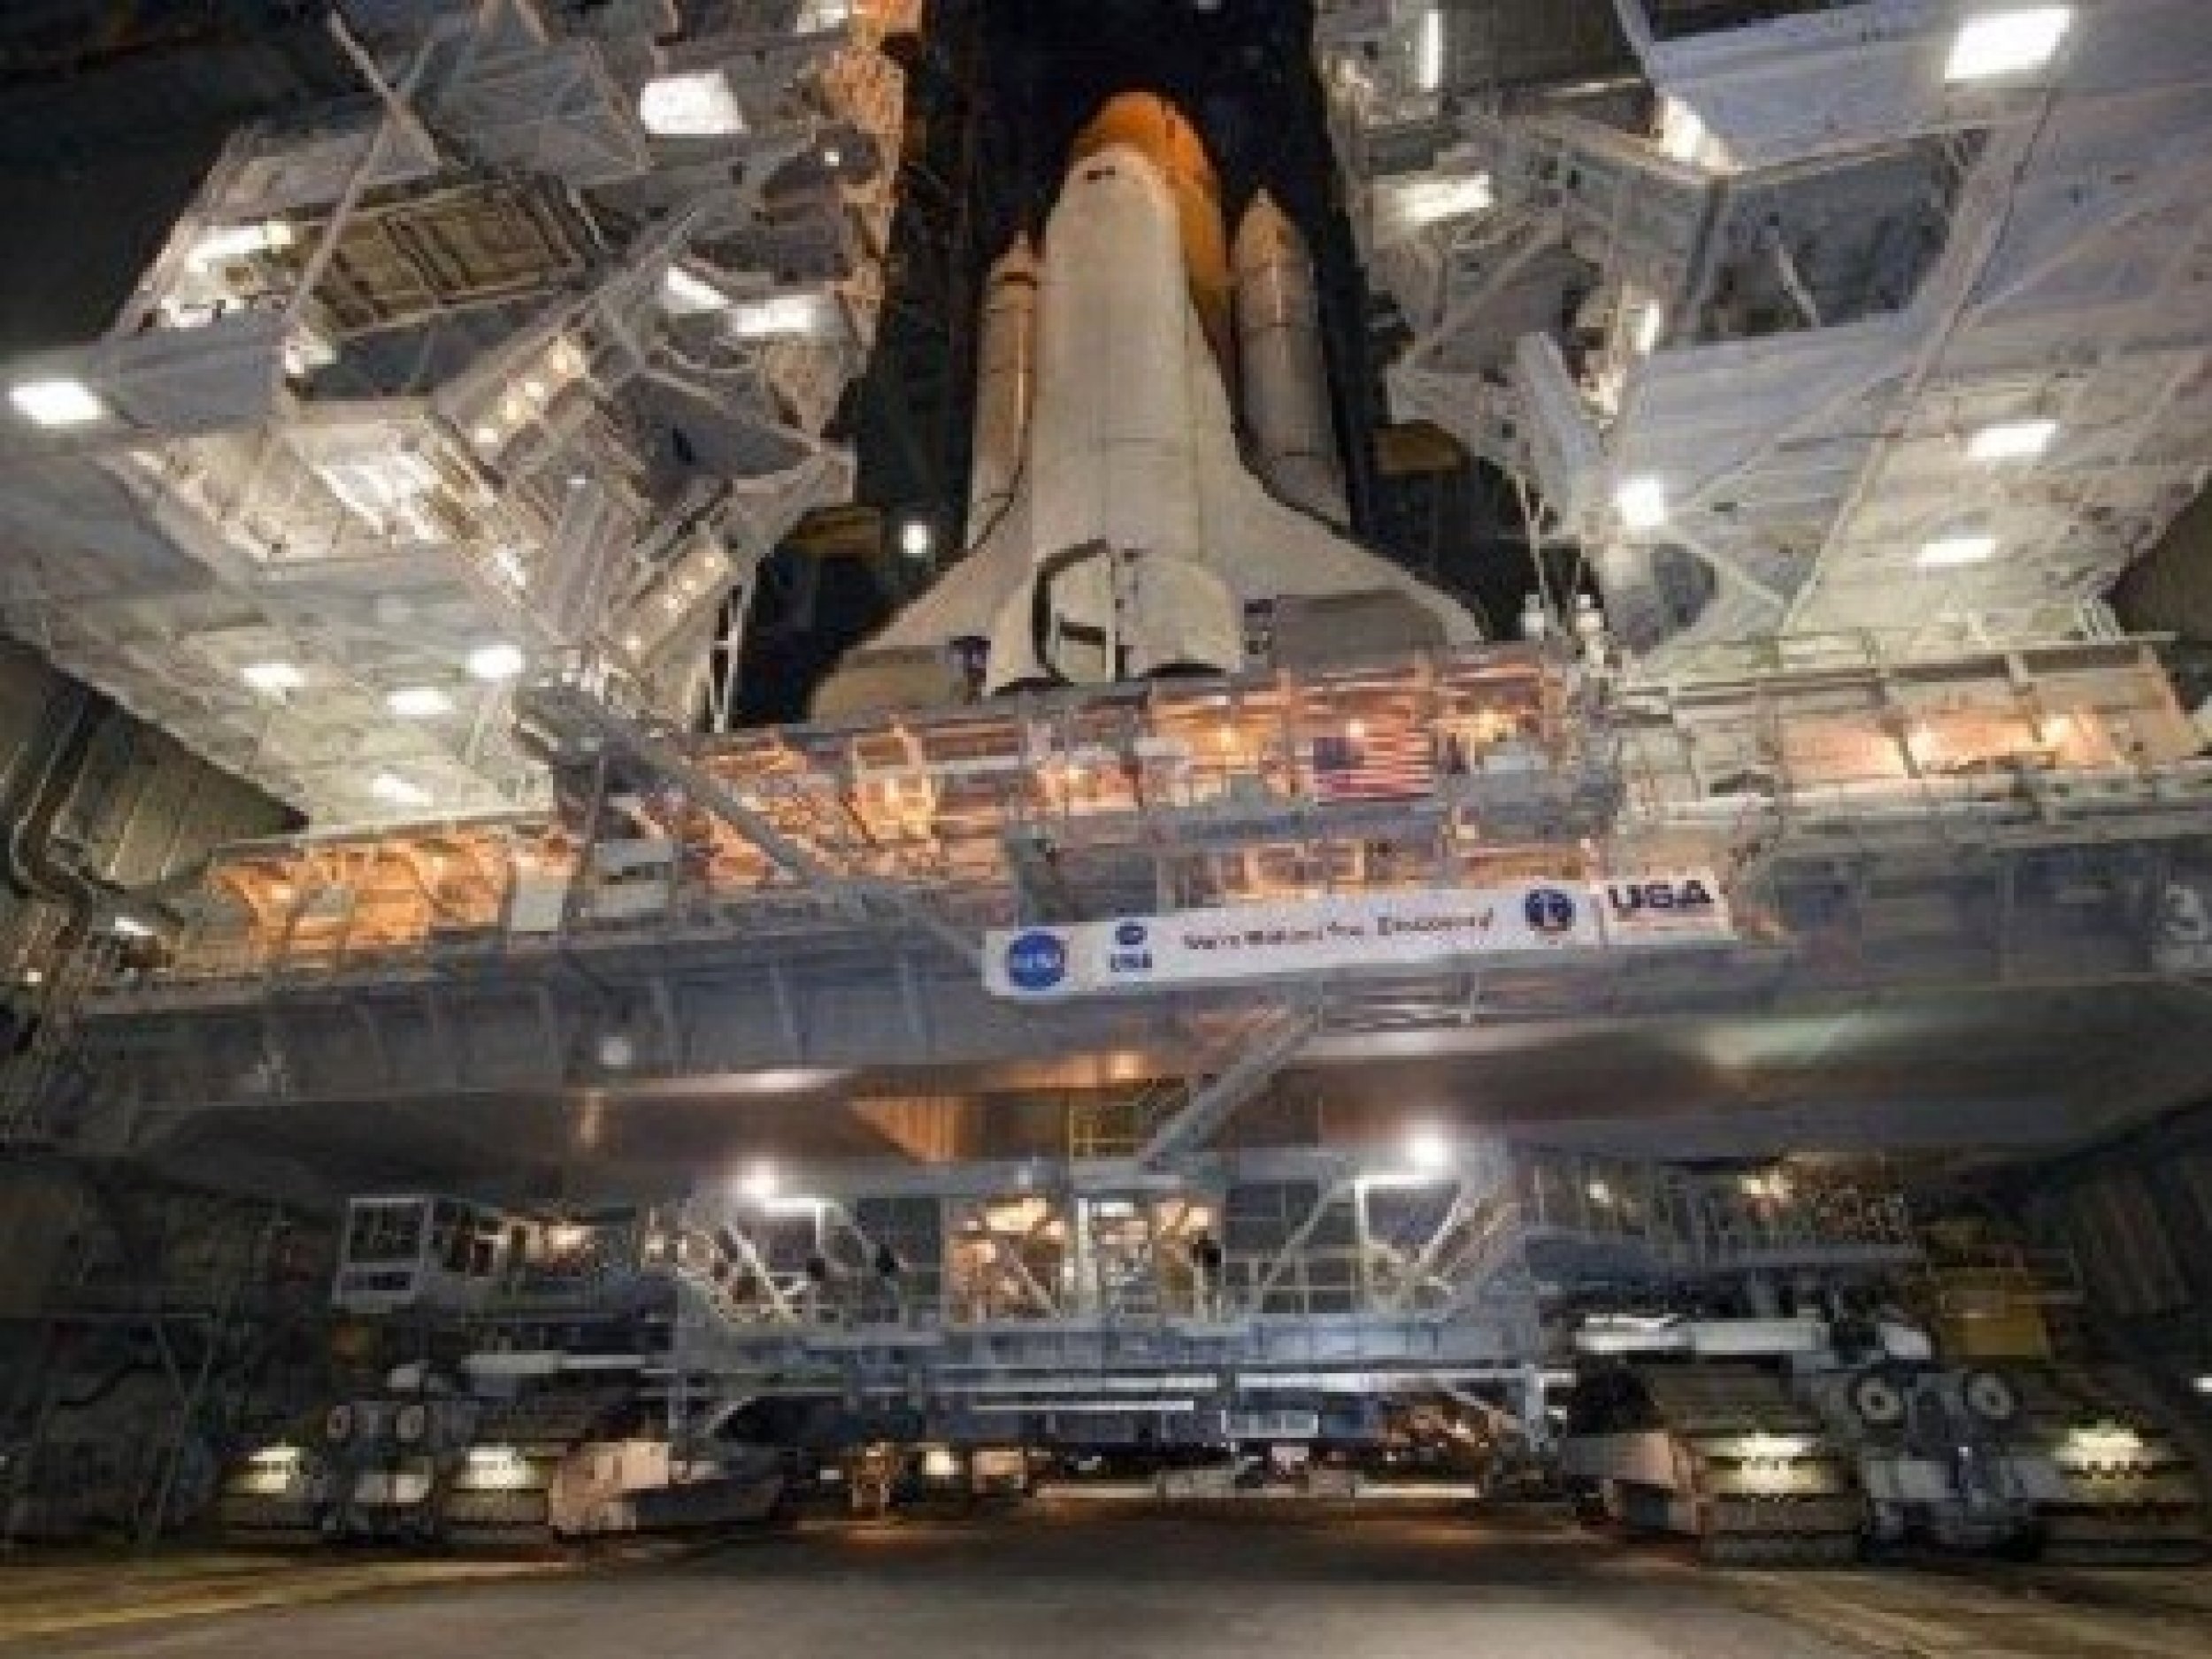 Discovery At Launch Pad